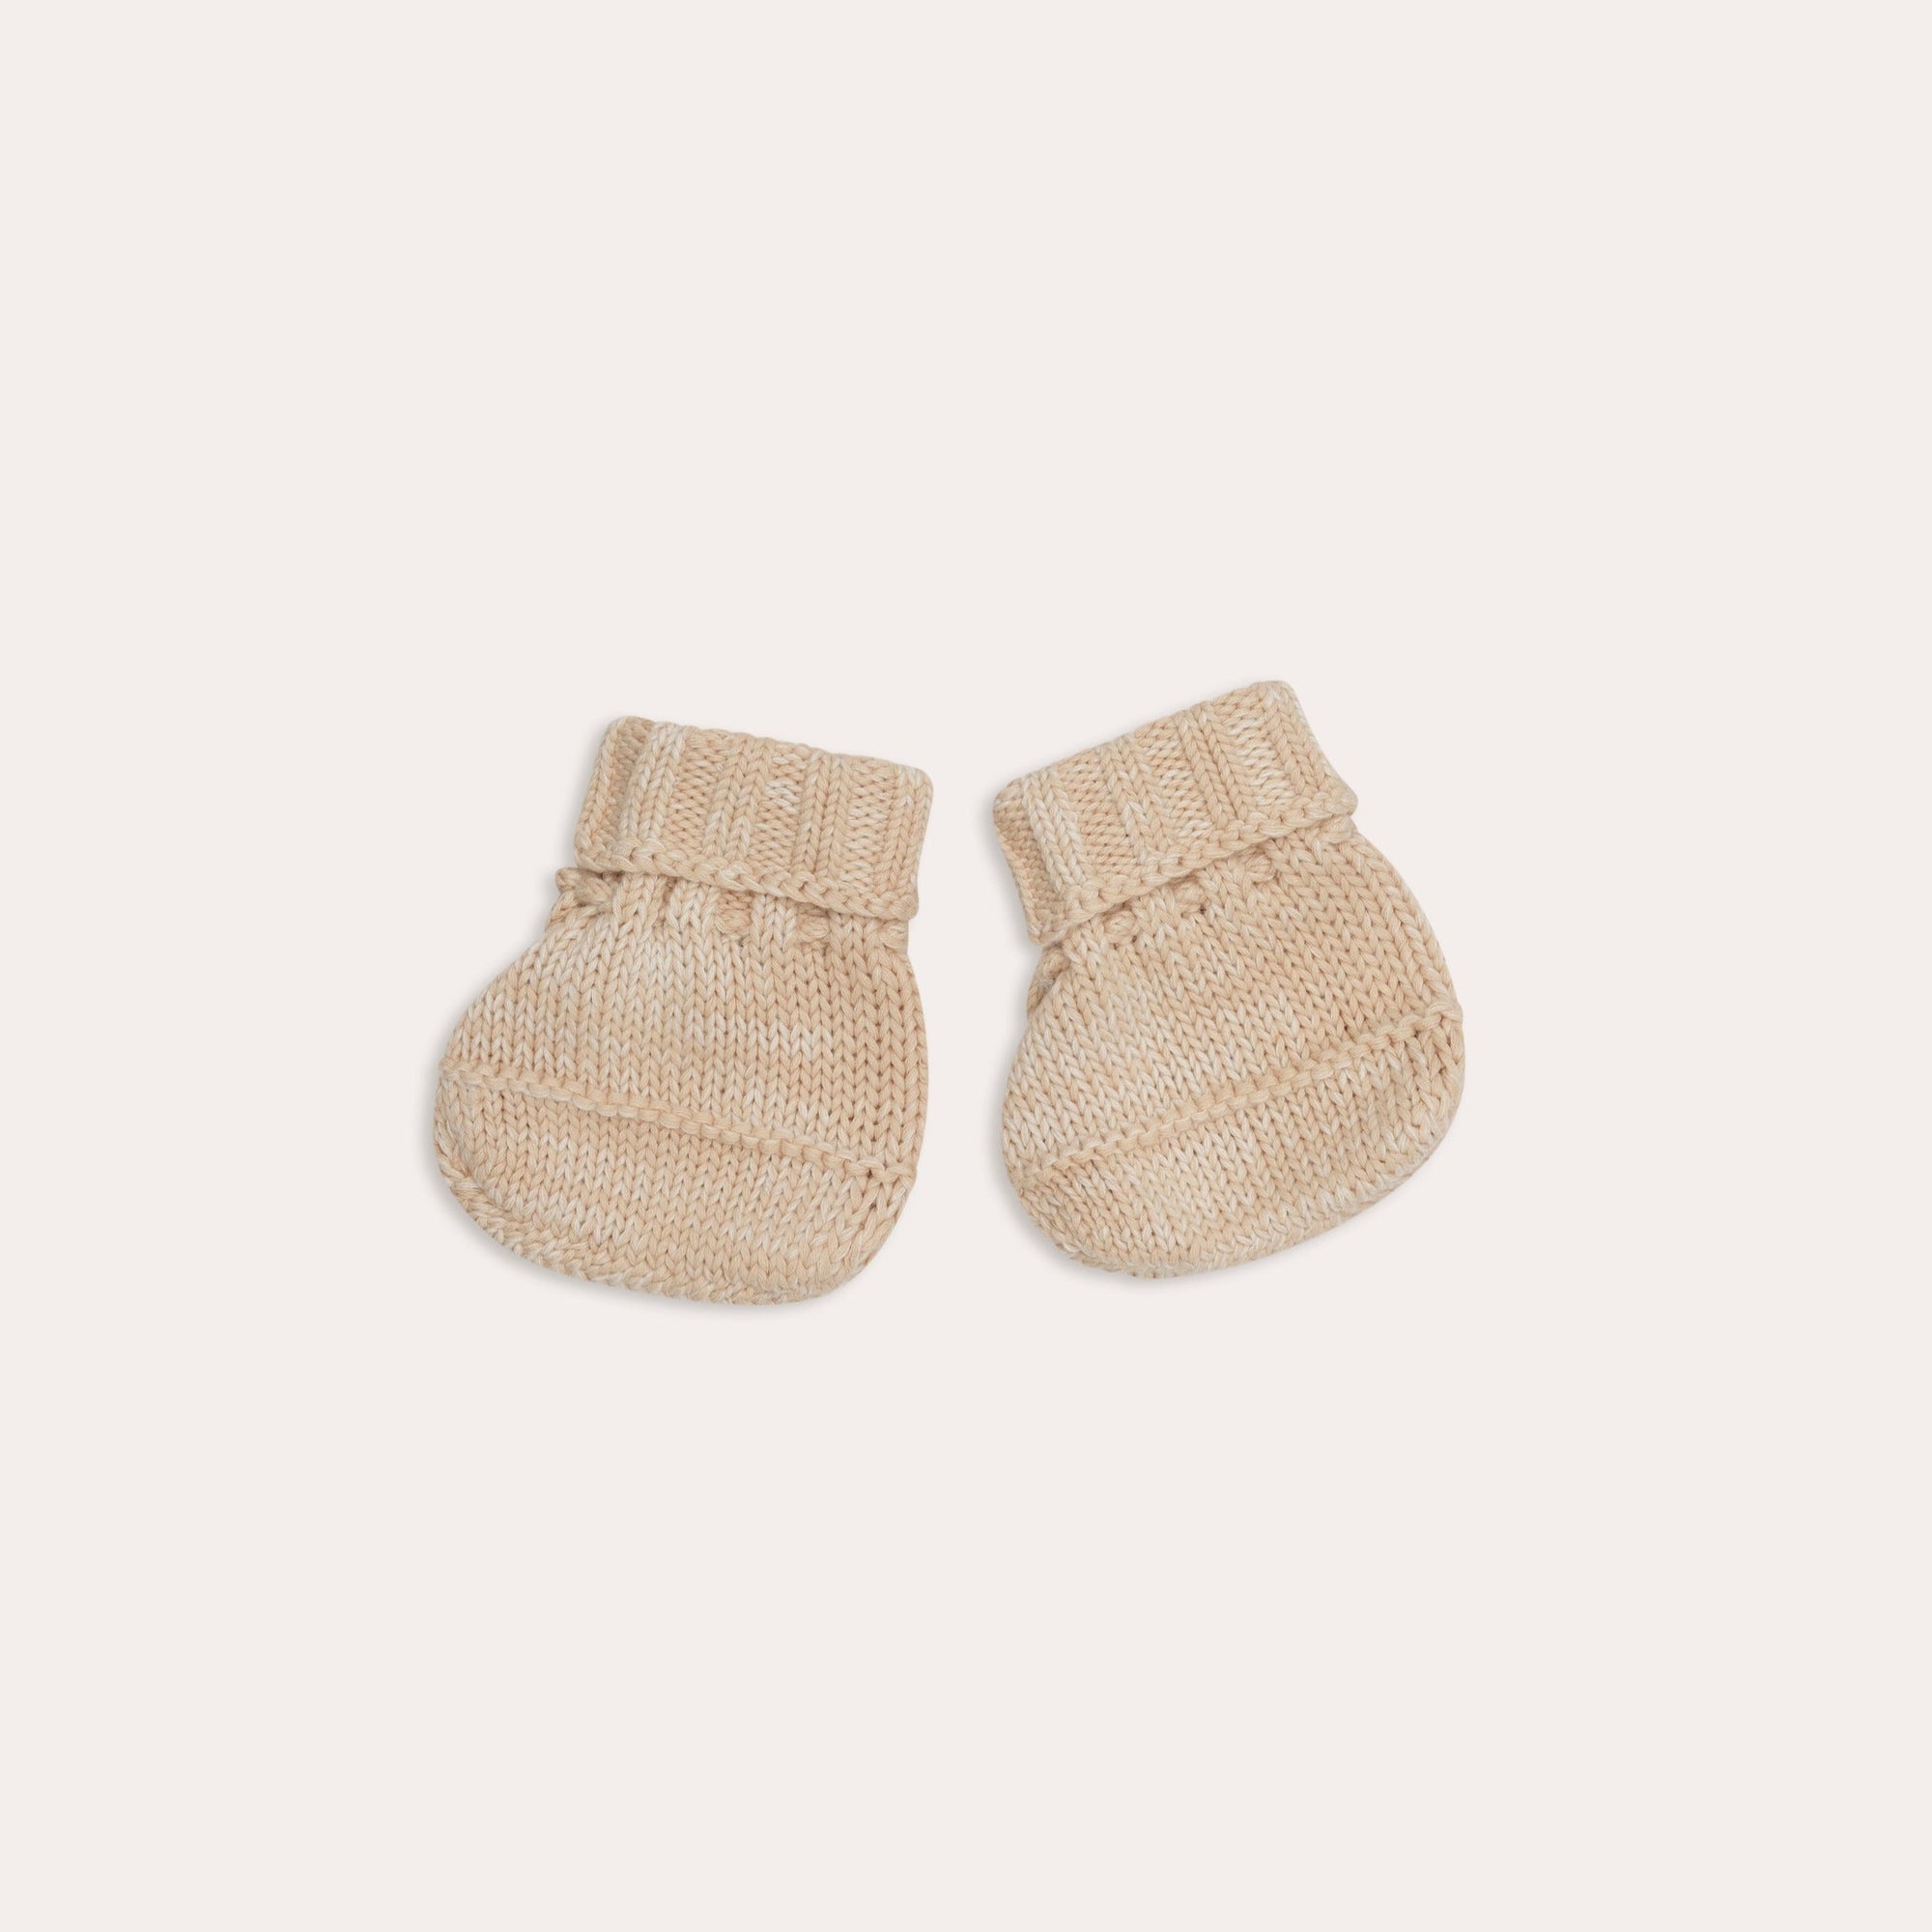 A pair of Illoura the Label illoura knitted alba booties | sand on a white background.